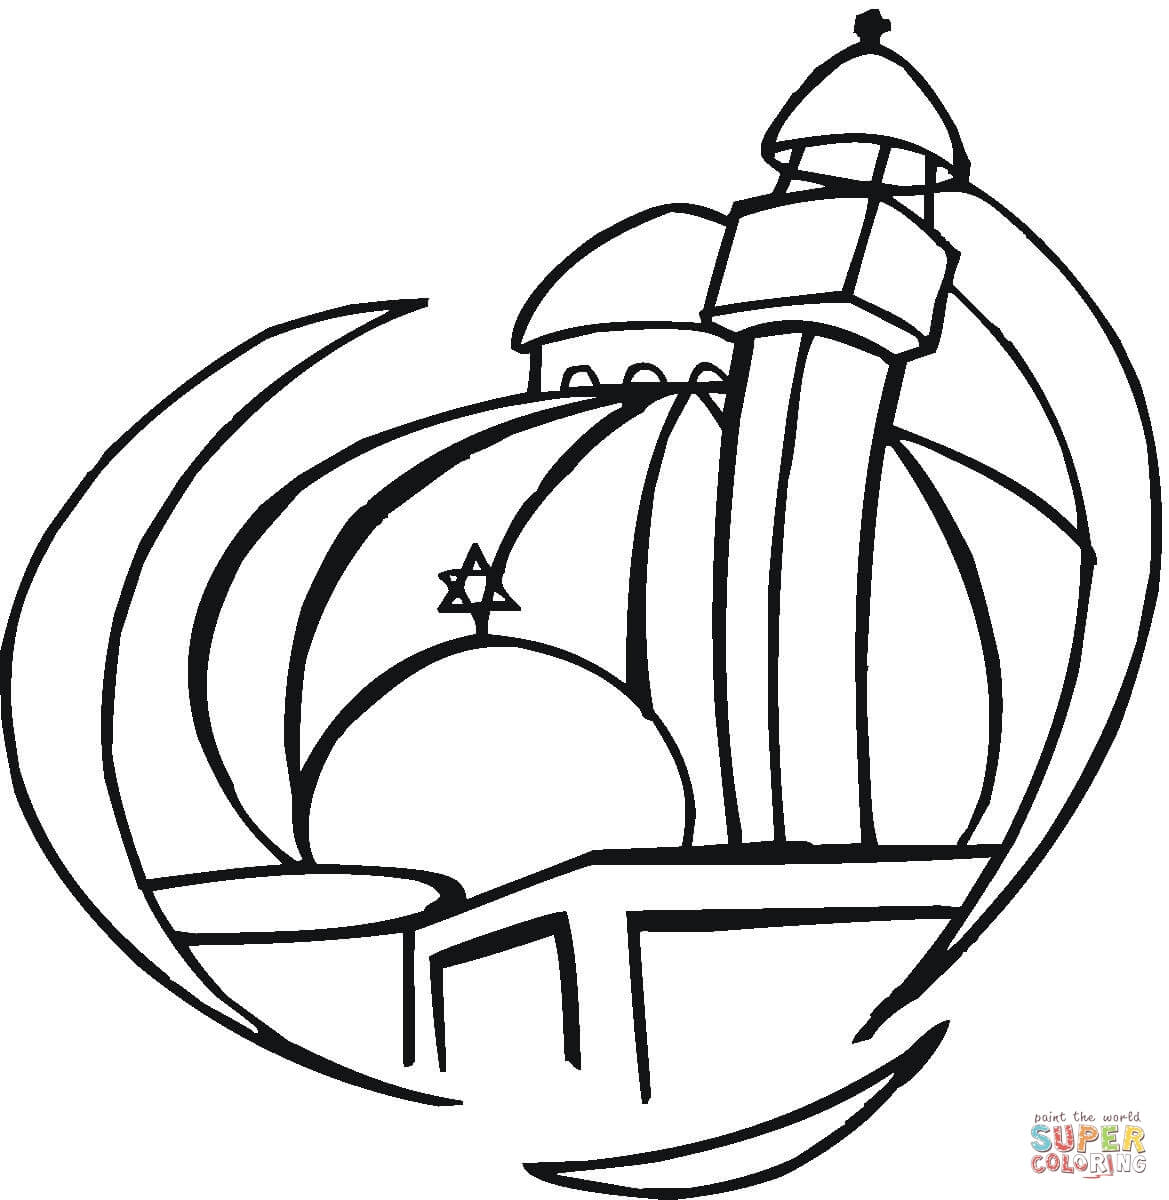 Lighthouse coloring page | Free Printable Coloring Pages